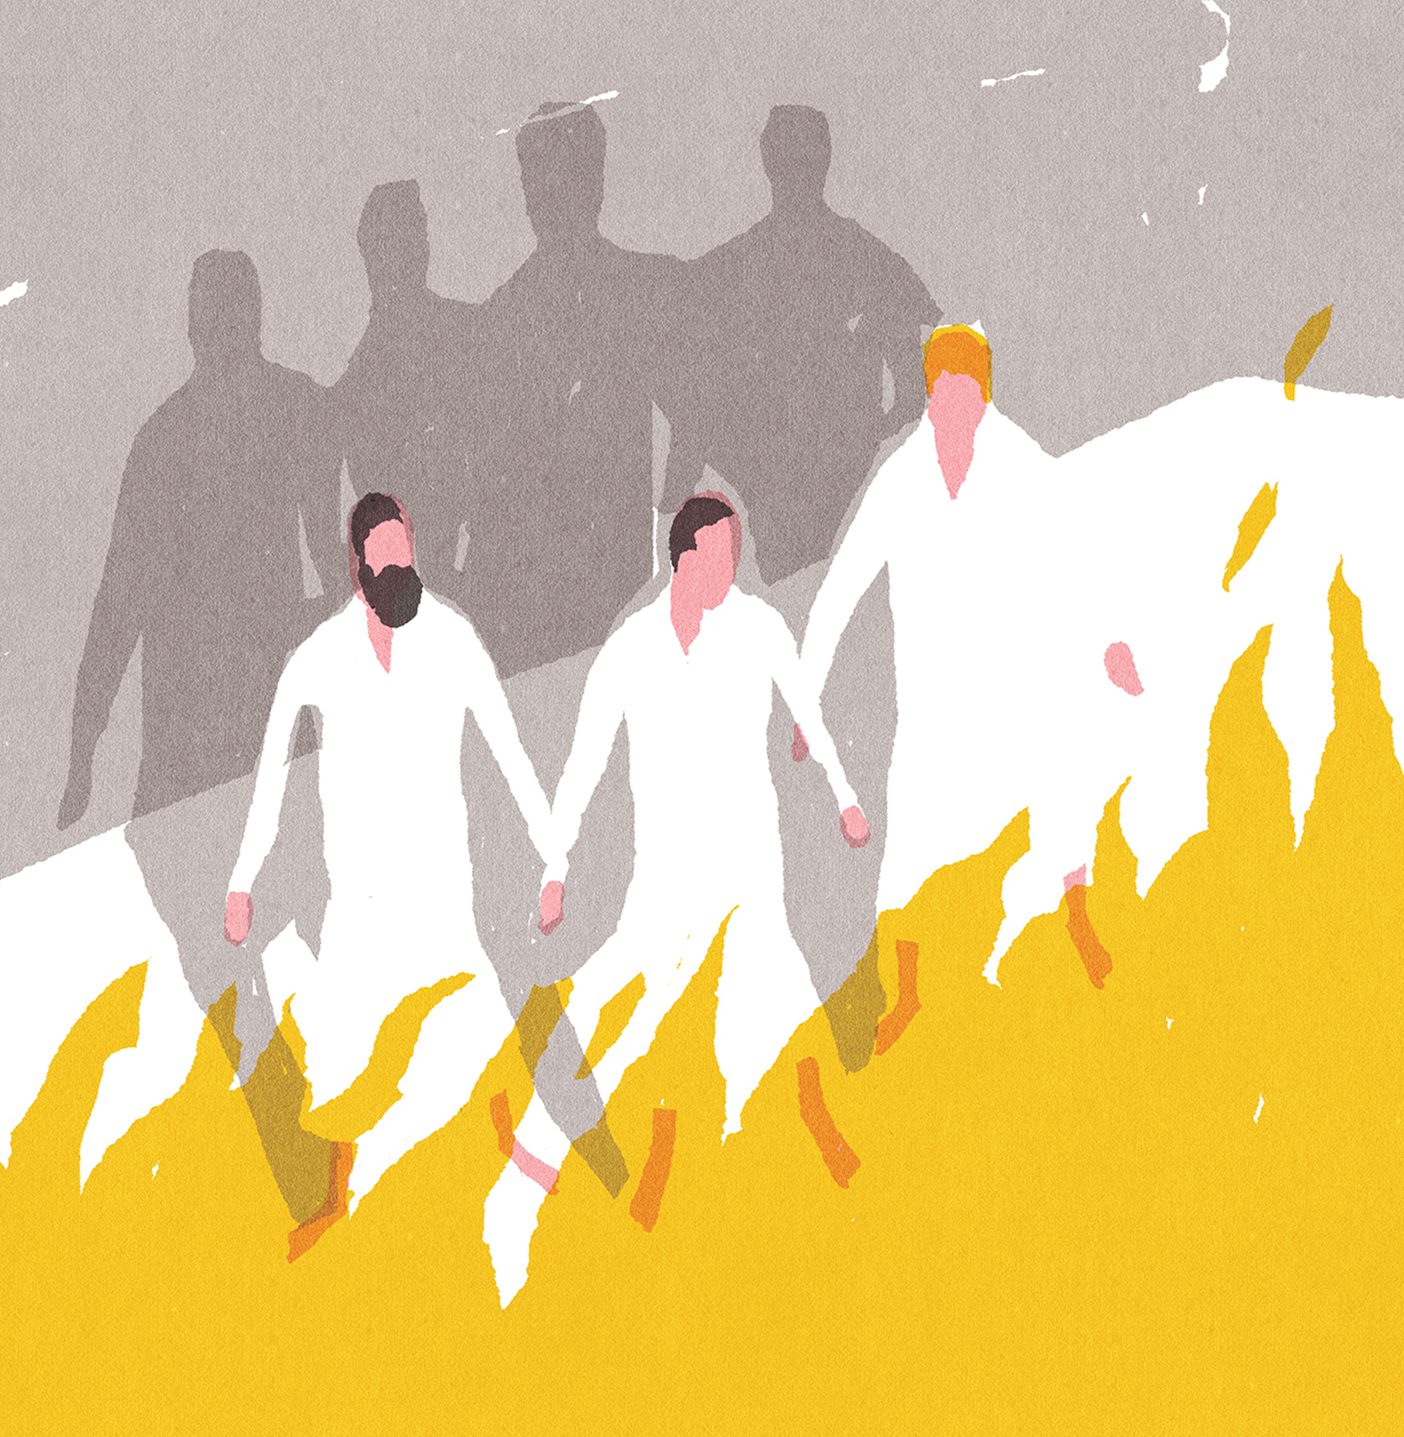 Illustration of men dressed in white standing together against a fire.